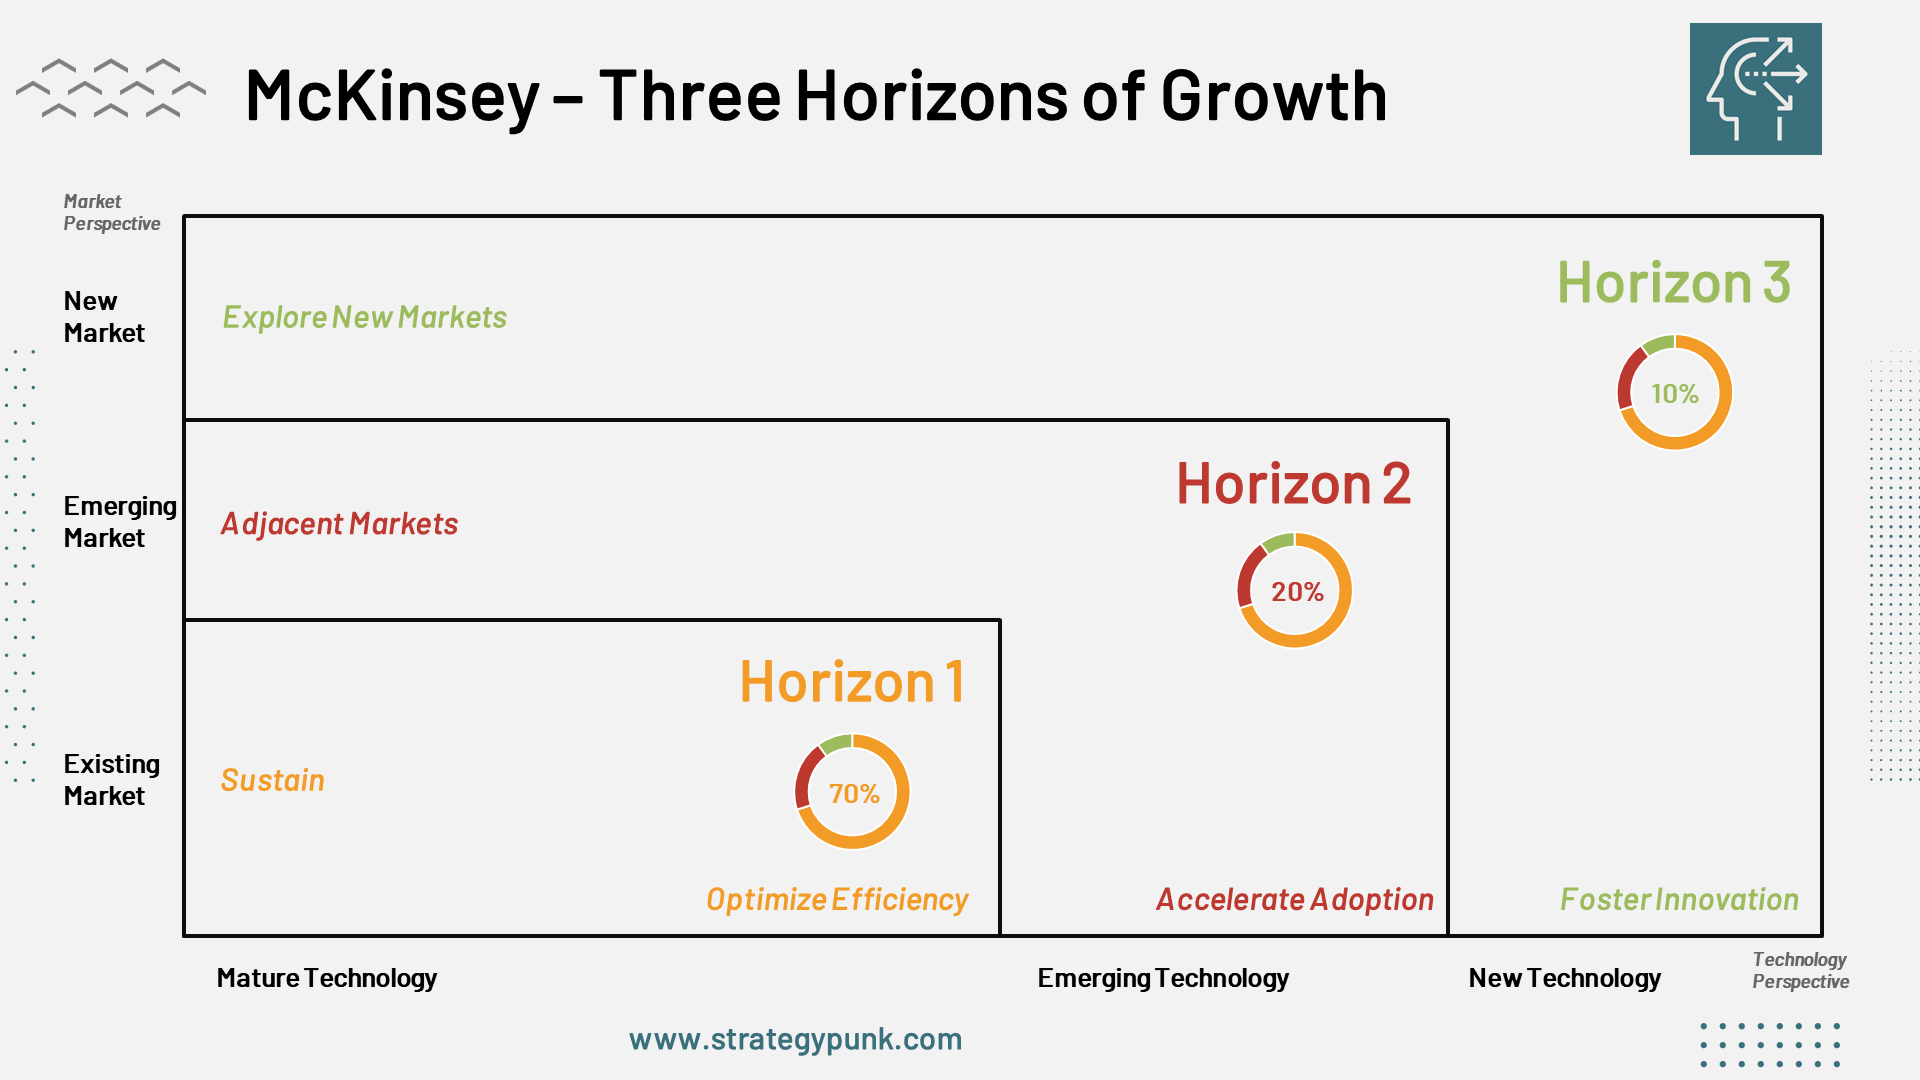 McKinsey Three Horizons of Growth: A Strategic Framework for Business Expansion